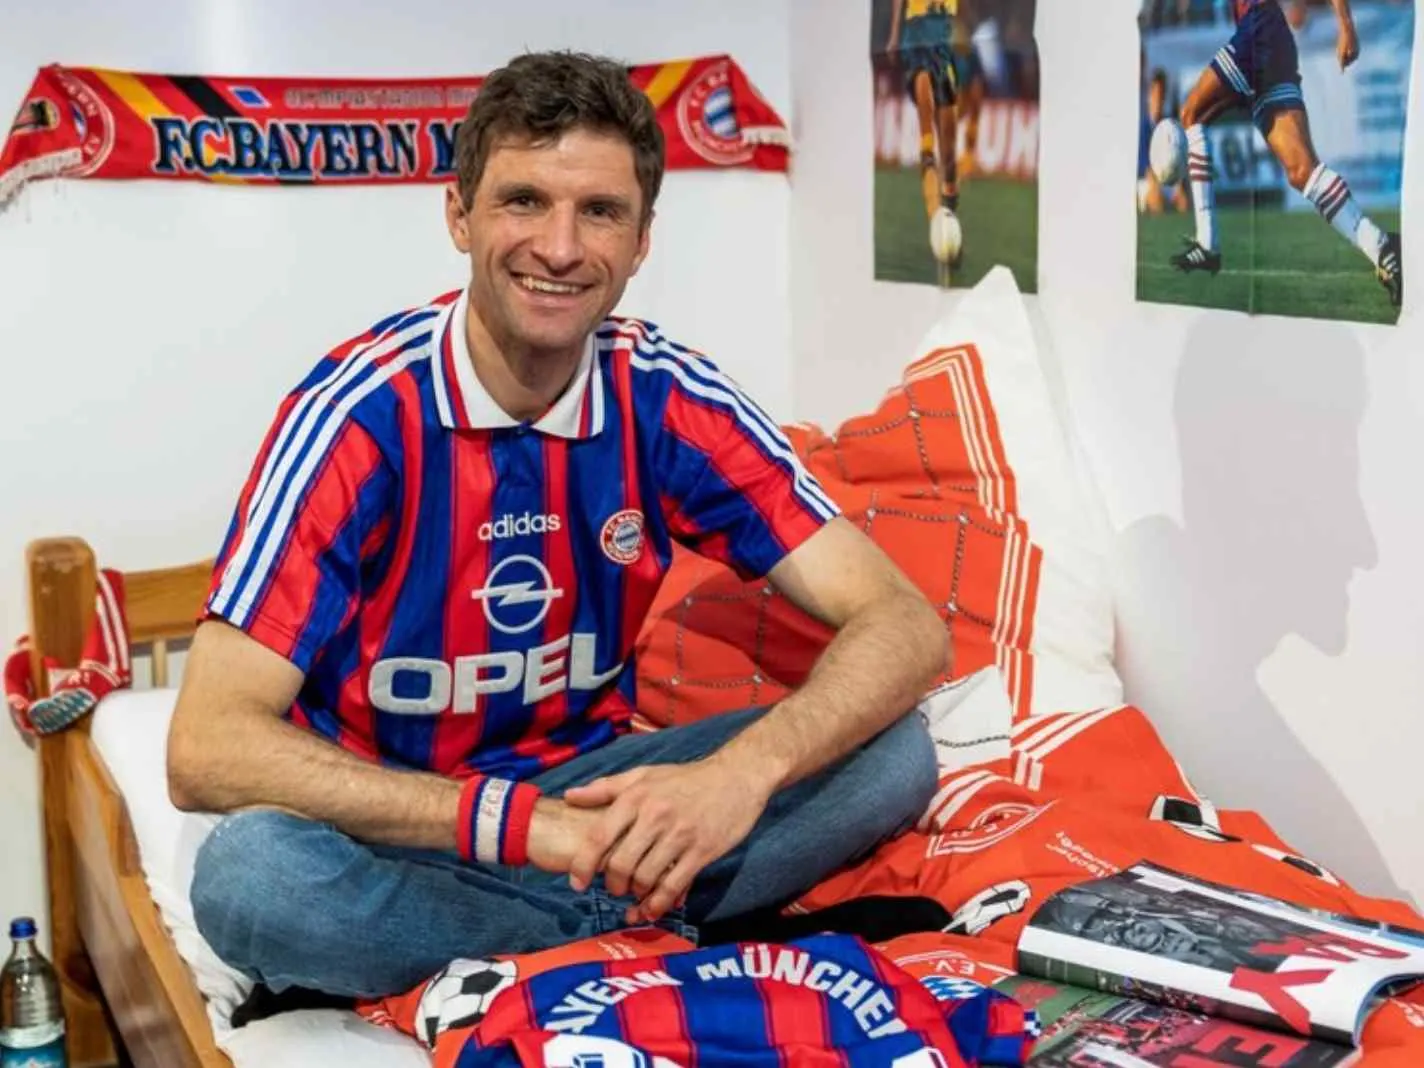 The image shows Thomas Muller recreating his childhood photo with a retro Bayern kit